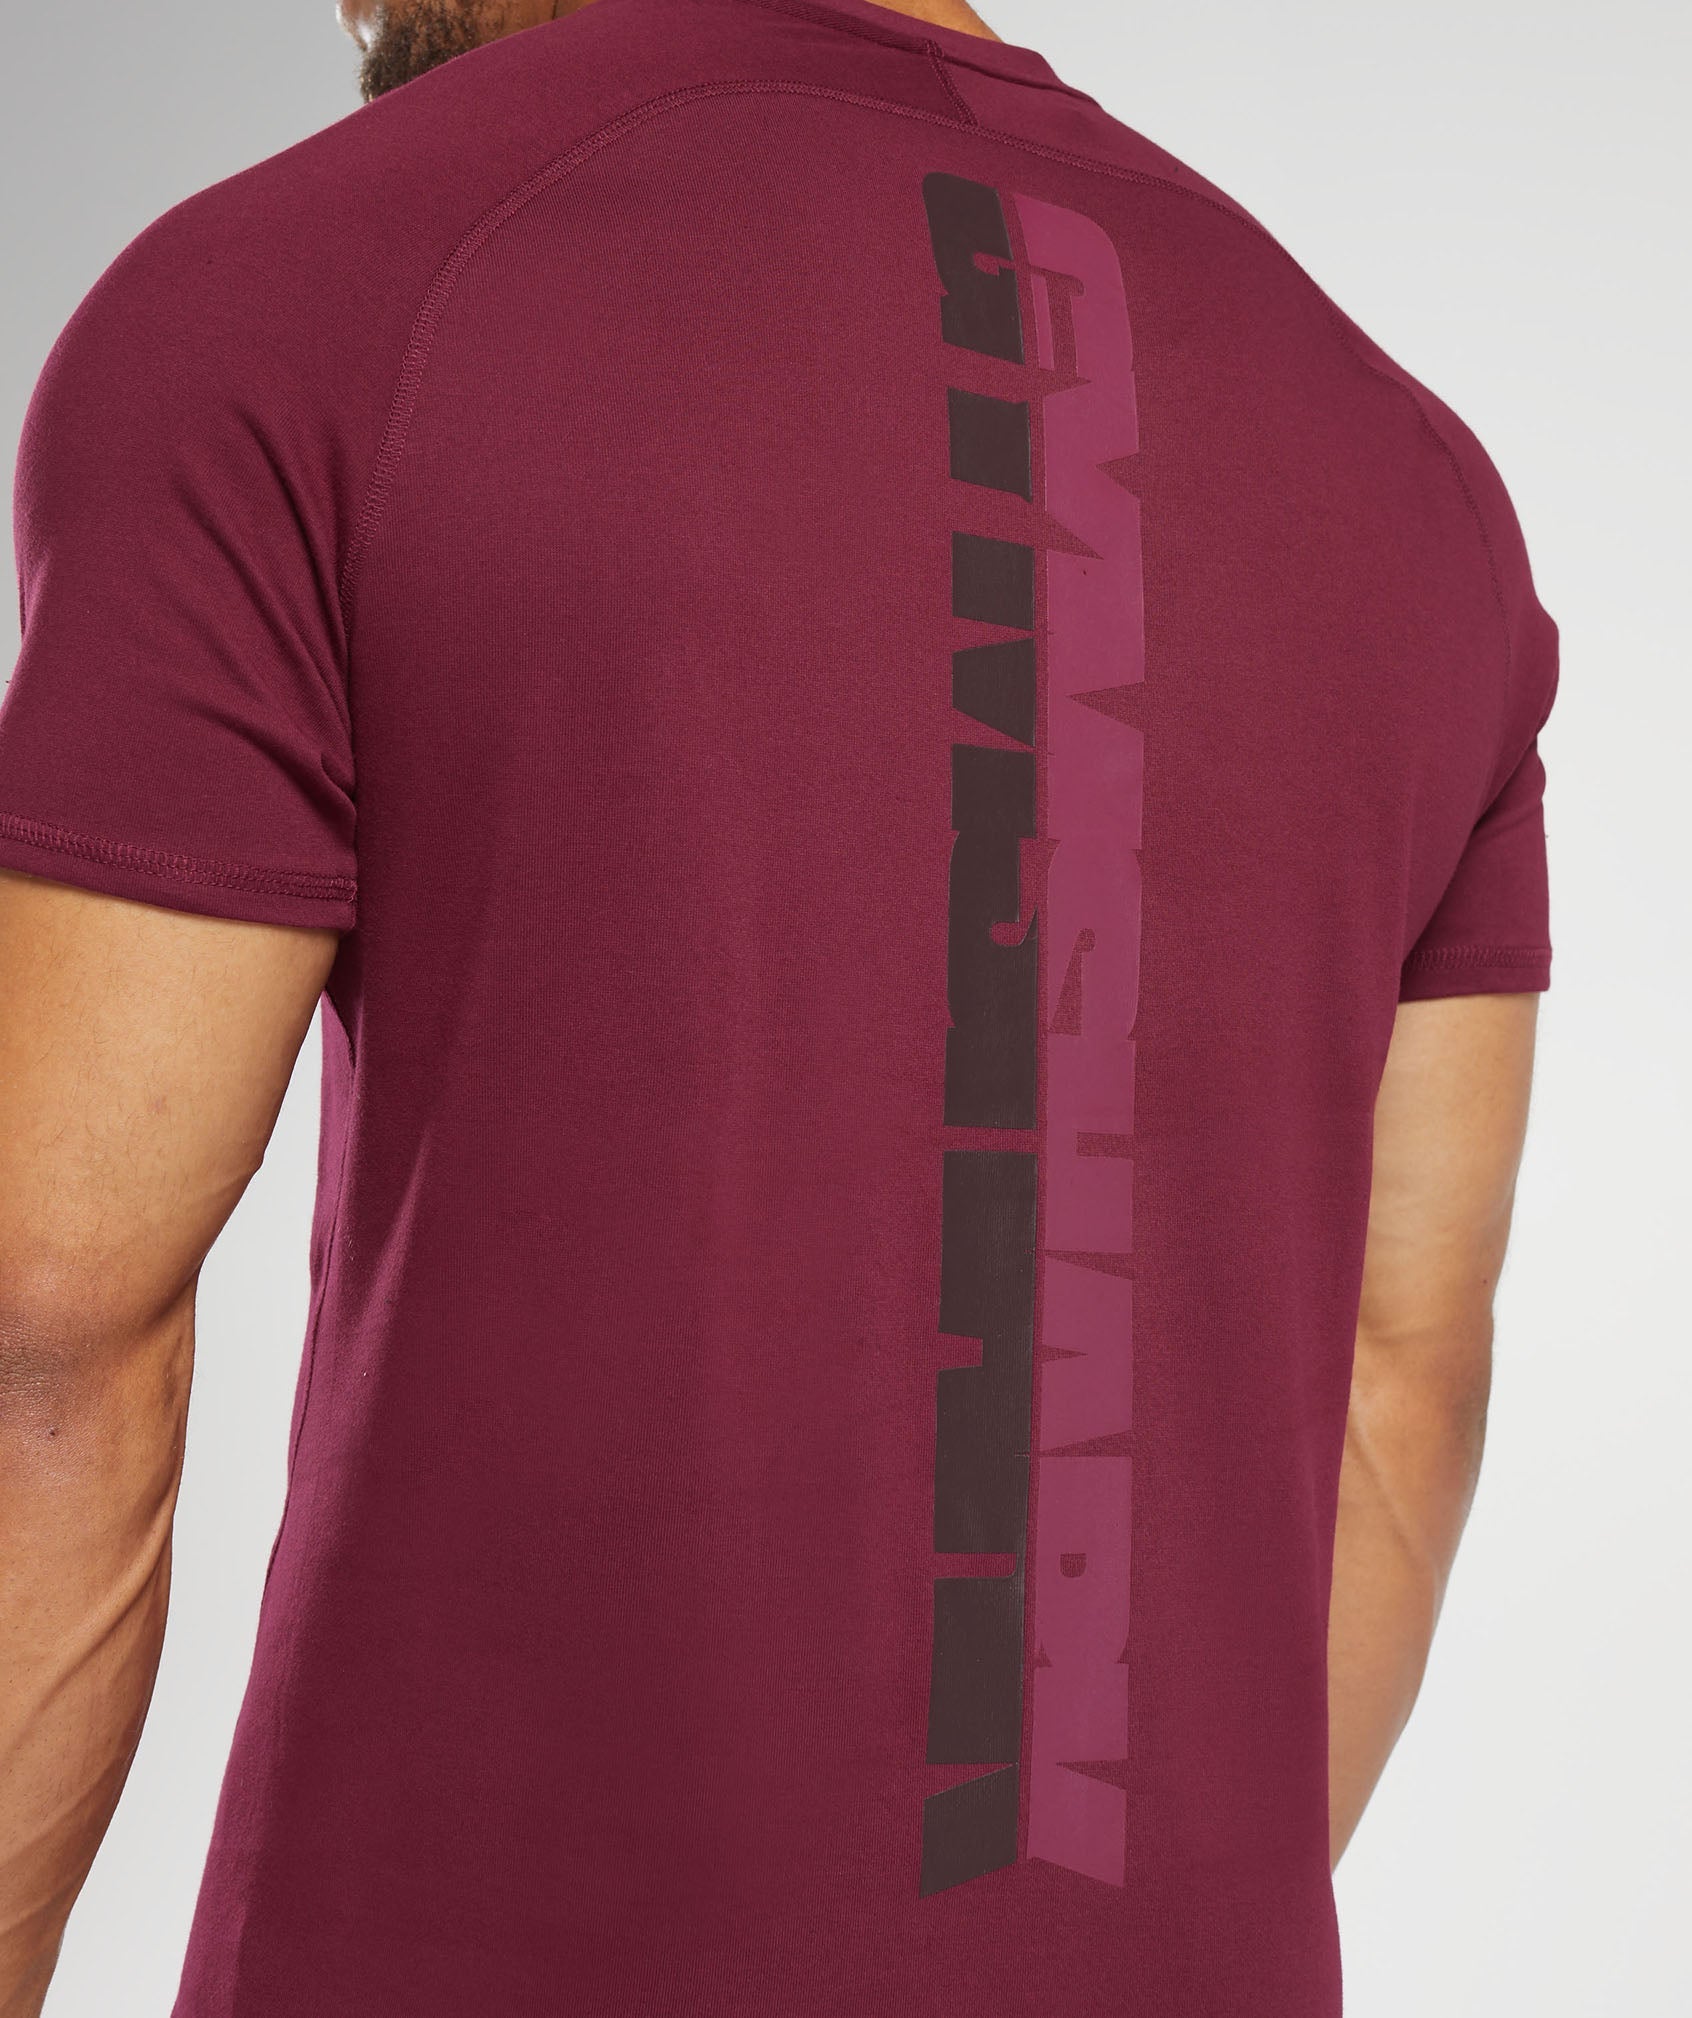 Bold T-Shirt in Plum Pink - view 5